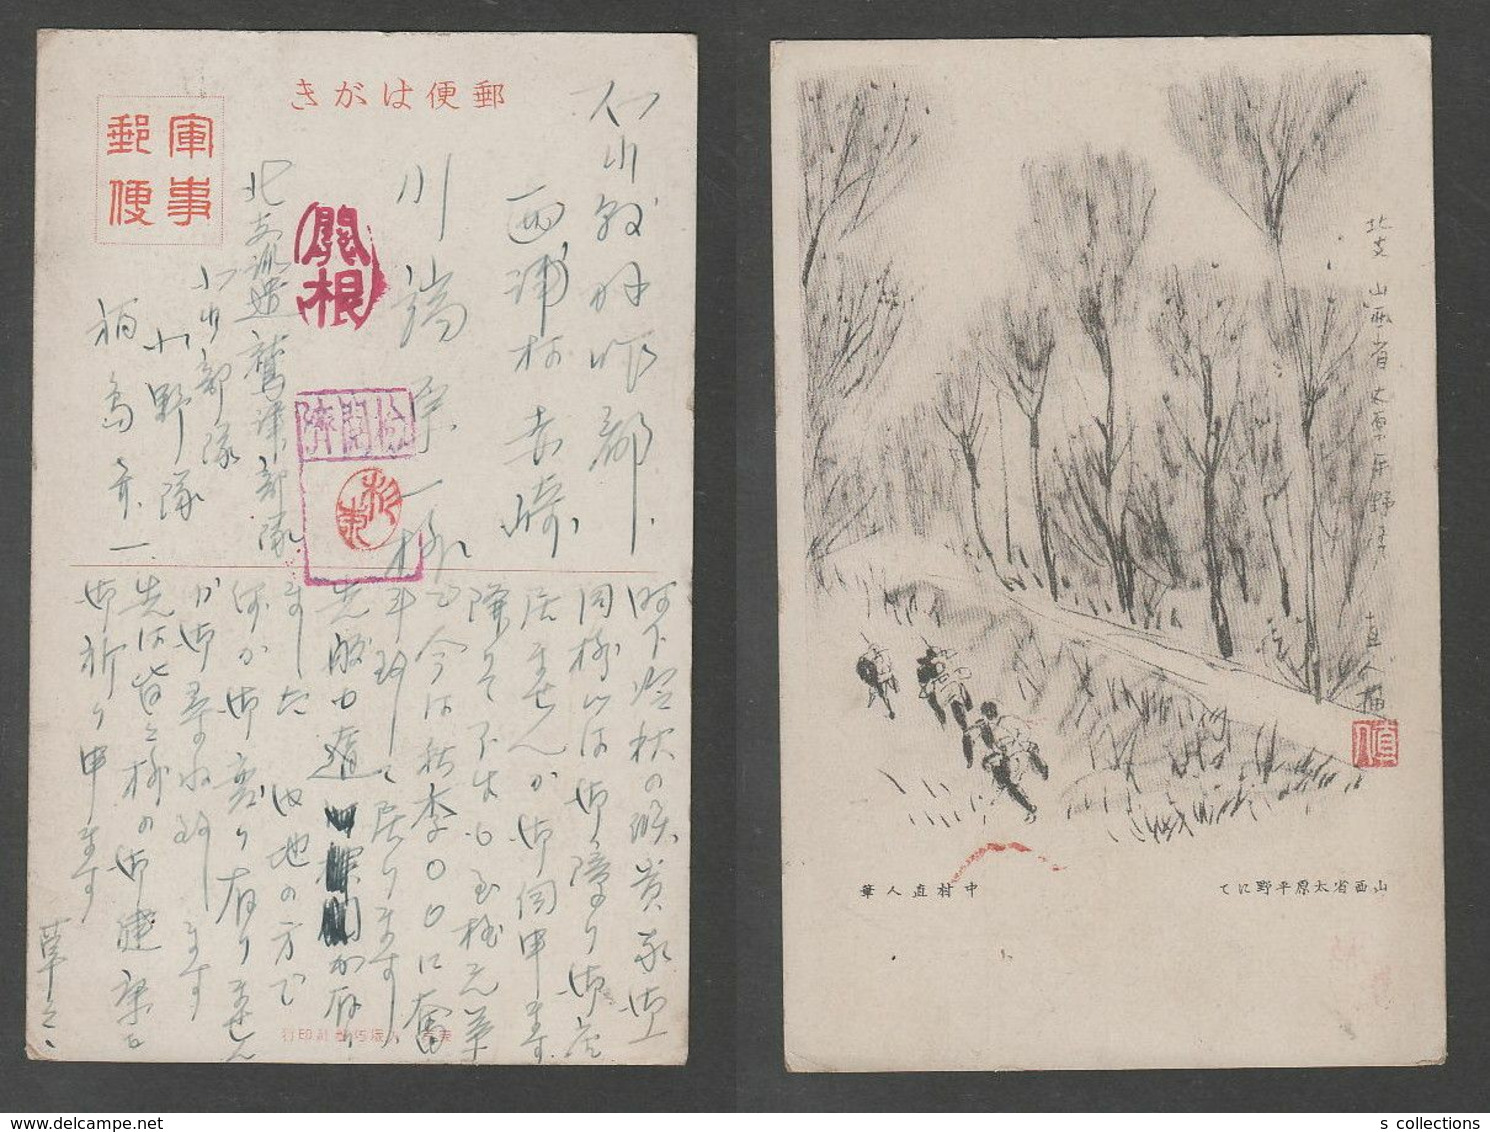 JAPAN WWII Military Shanxi Taiyuan Plains Picture Postcard NORTH CHINA WW2 MANCHURIA CHINE MANDCHOUKOUO JAPON GIAPPONE - 1941-45 Cina Del Nord